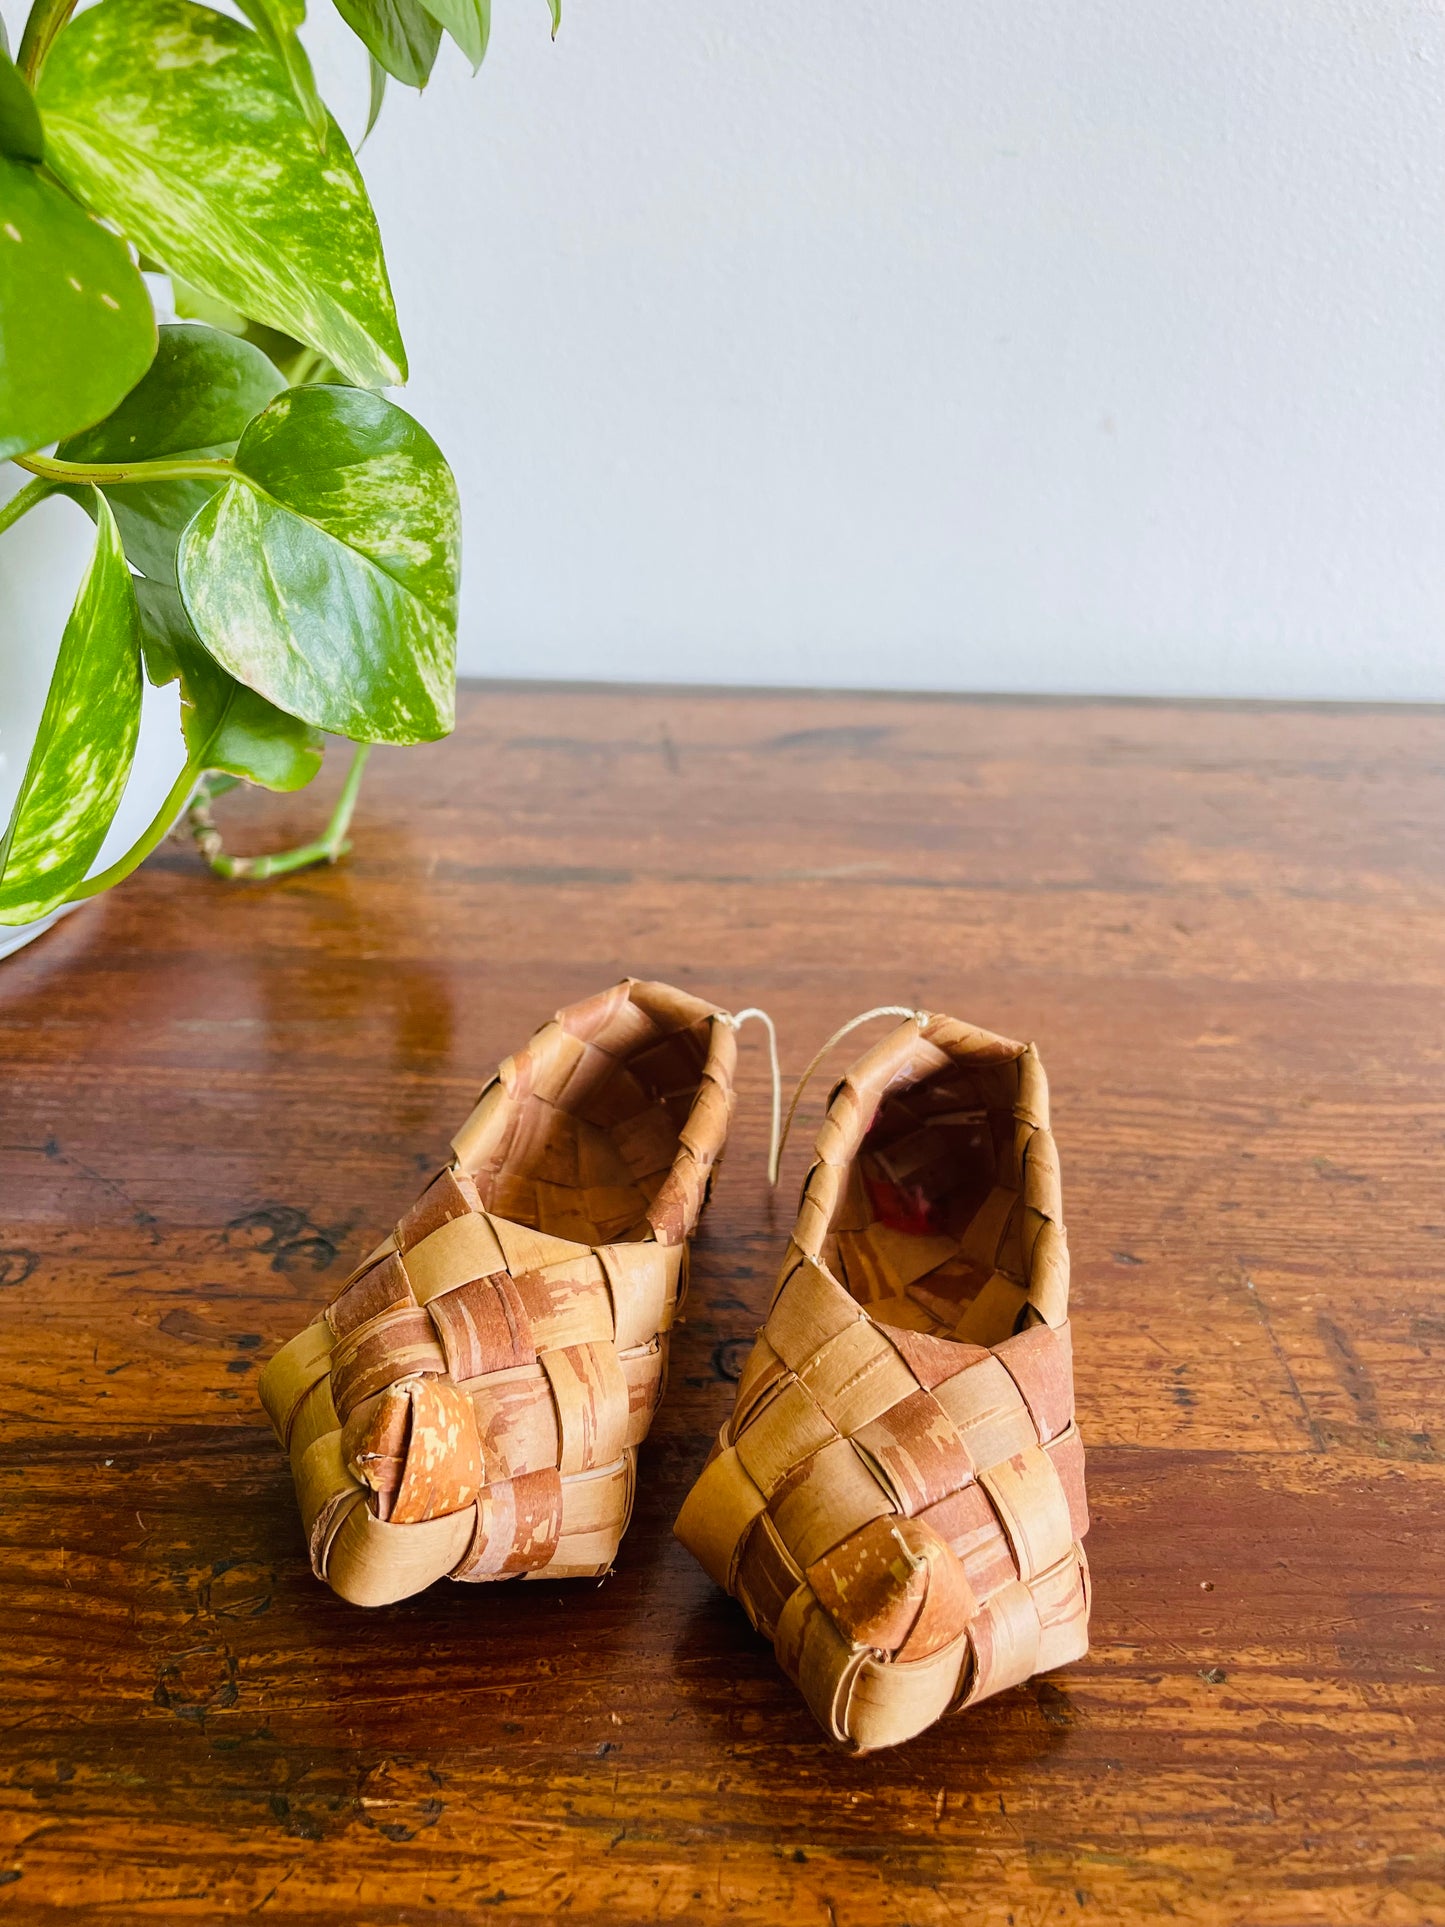 Finnish Birch Bark Woven Wood Shoes # 2 - Set of 2 Hanging on Rope